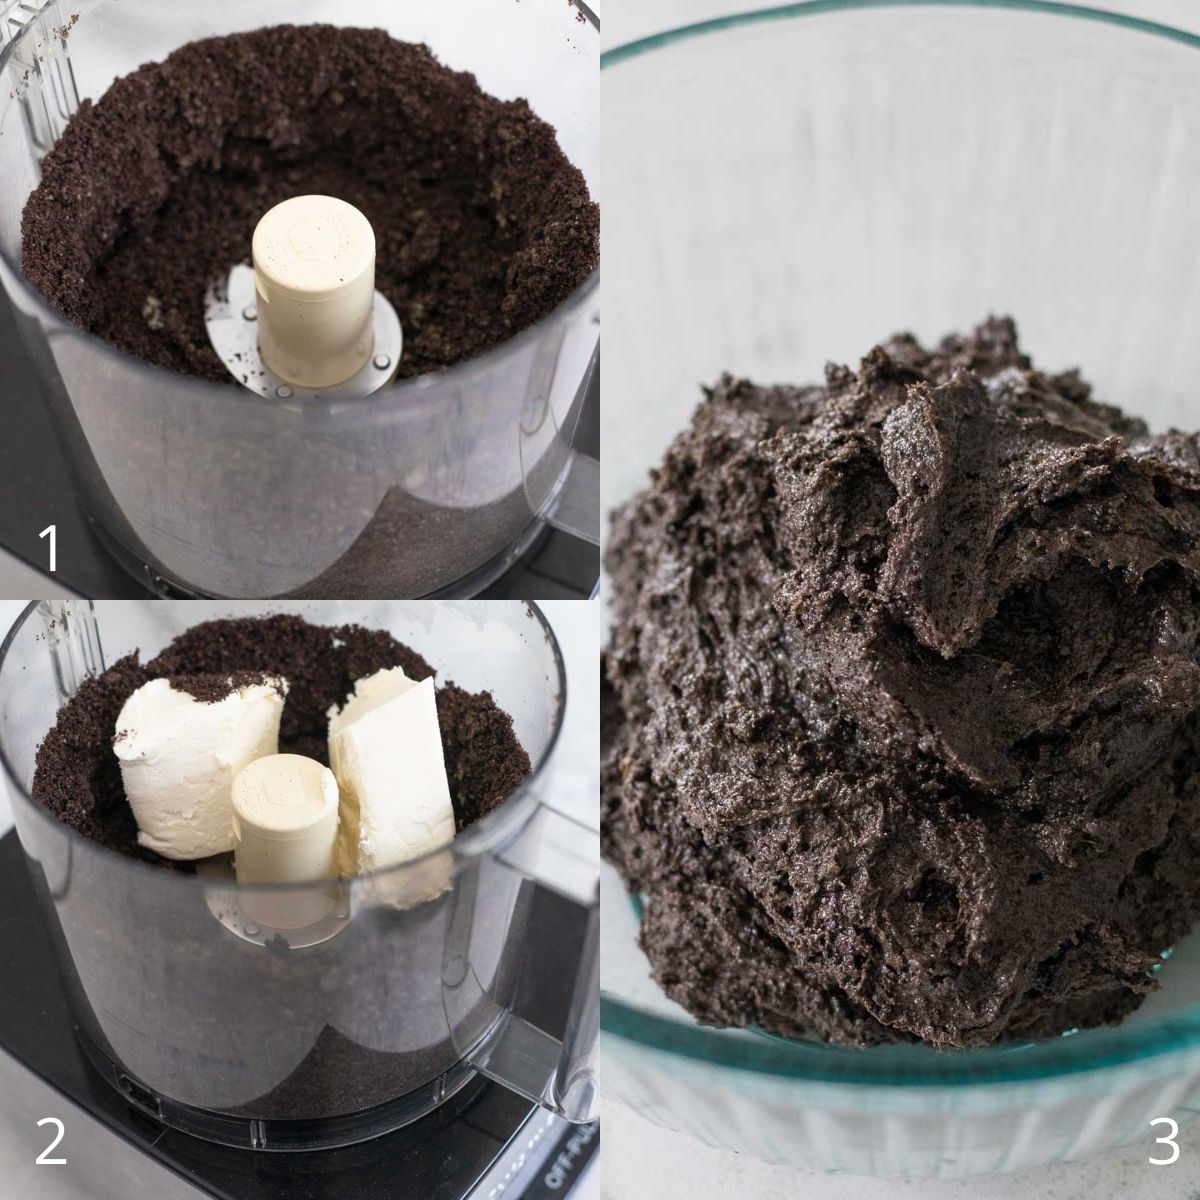 The step by step photos show the Oreo cookies in a food processor being crumbled and then mixed with cream cheese. The final shot shows the cookie dough ball.